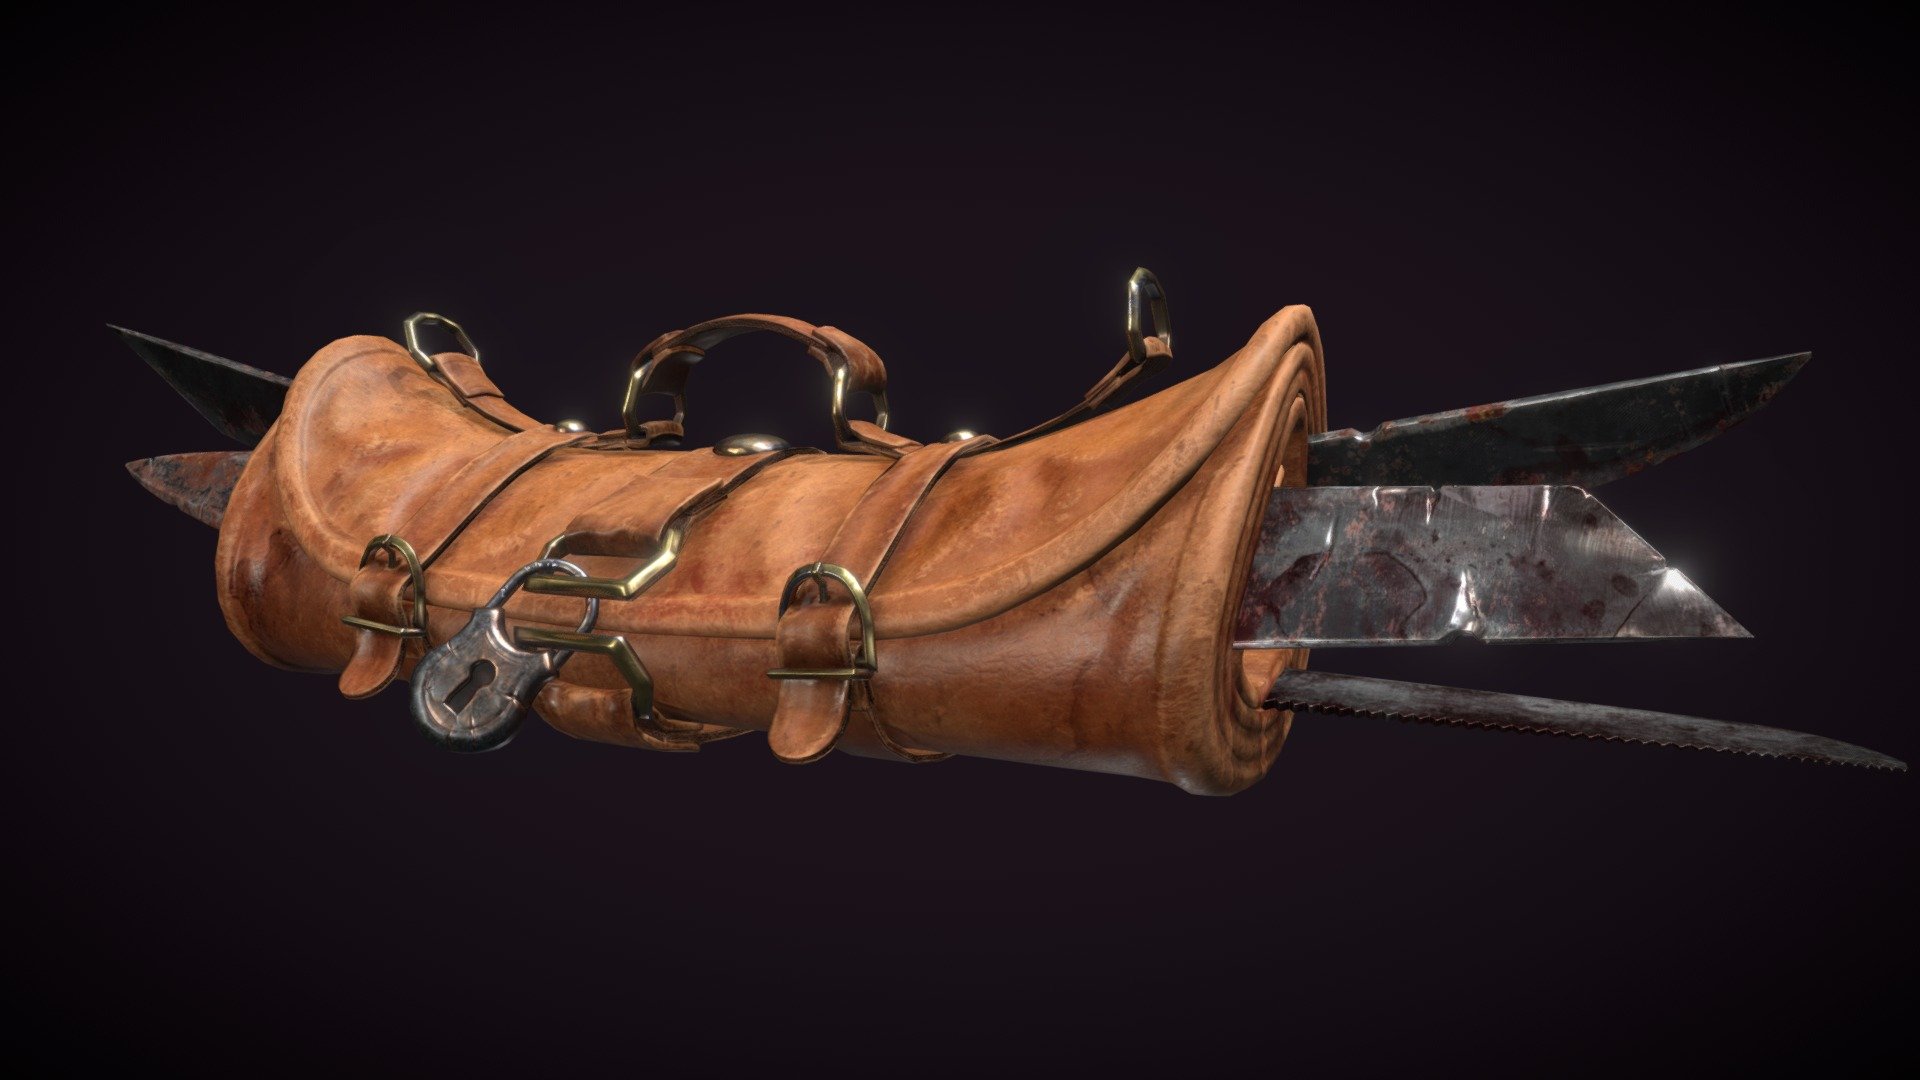 This cartoonishly bloody knifebag has been modeled in 3ds Max and Zbrush, and textured in Substance Painter and Photoshop. It doesn't seem like the tools inside are only used for cooking&hellip; - Chef's Knife Bag - Game Asset - 3D model by Bogaerts.Quinn 3d model